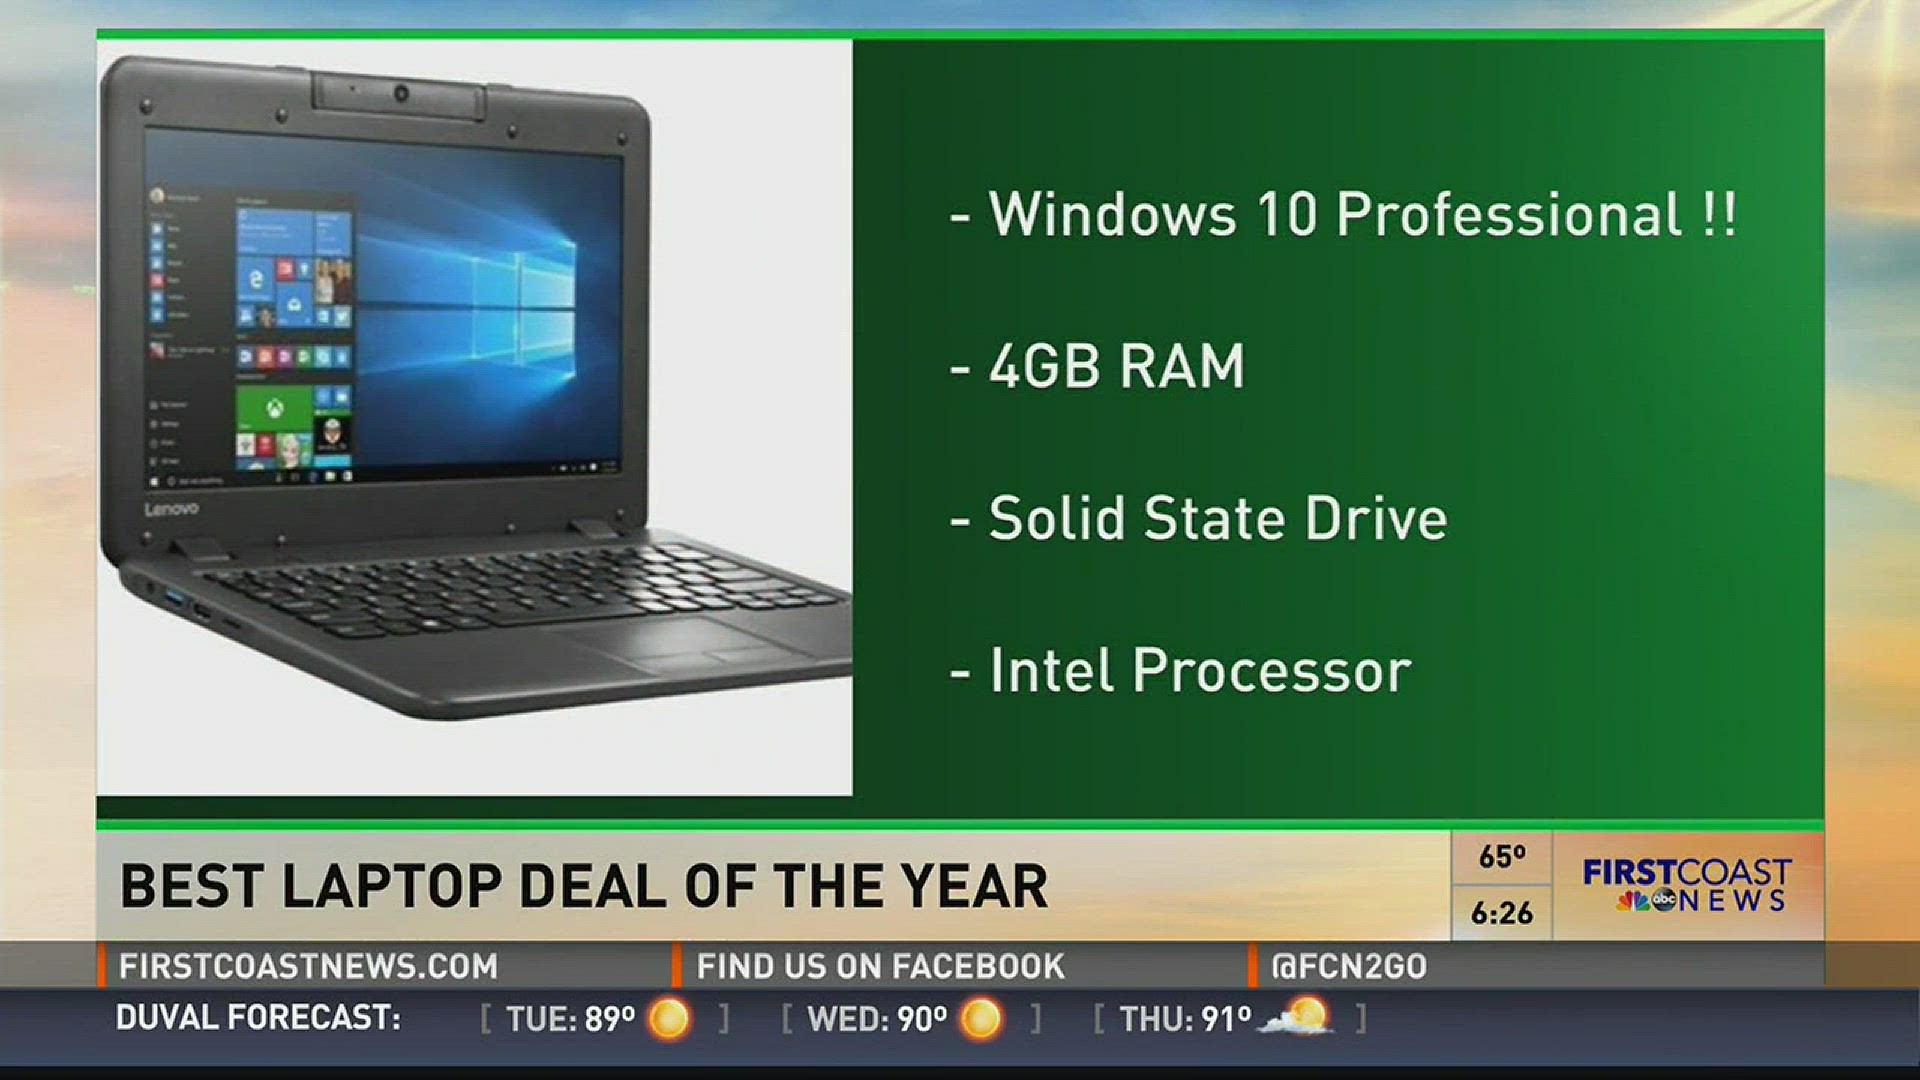 Best laptop deal of the year